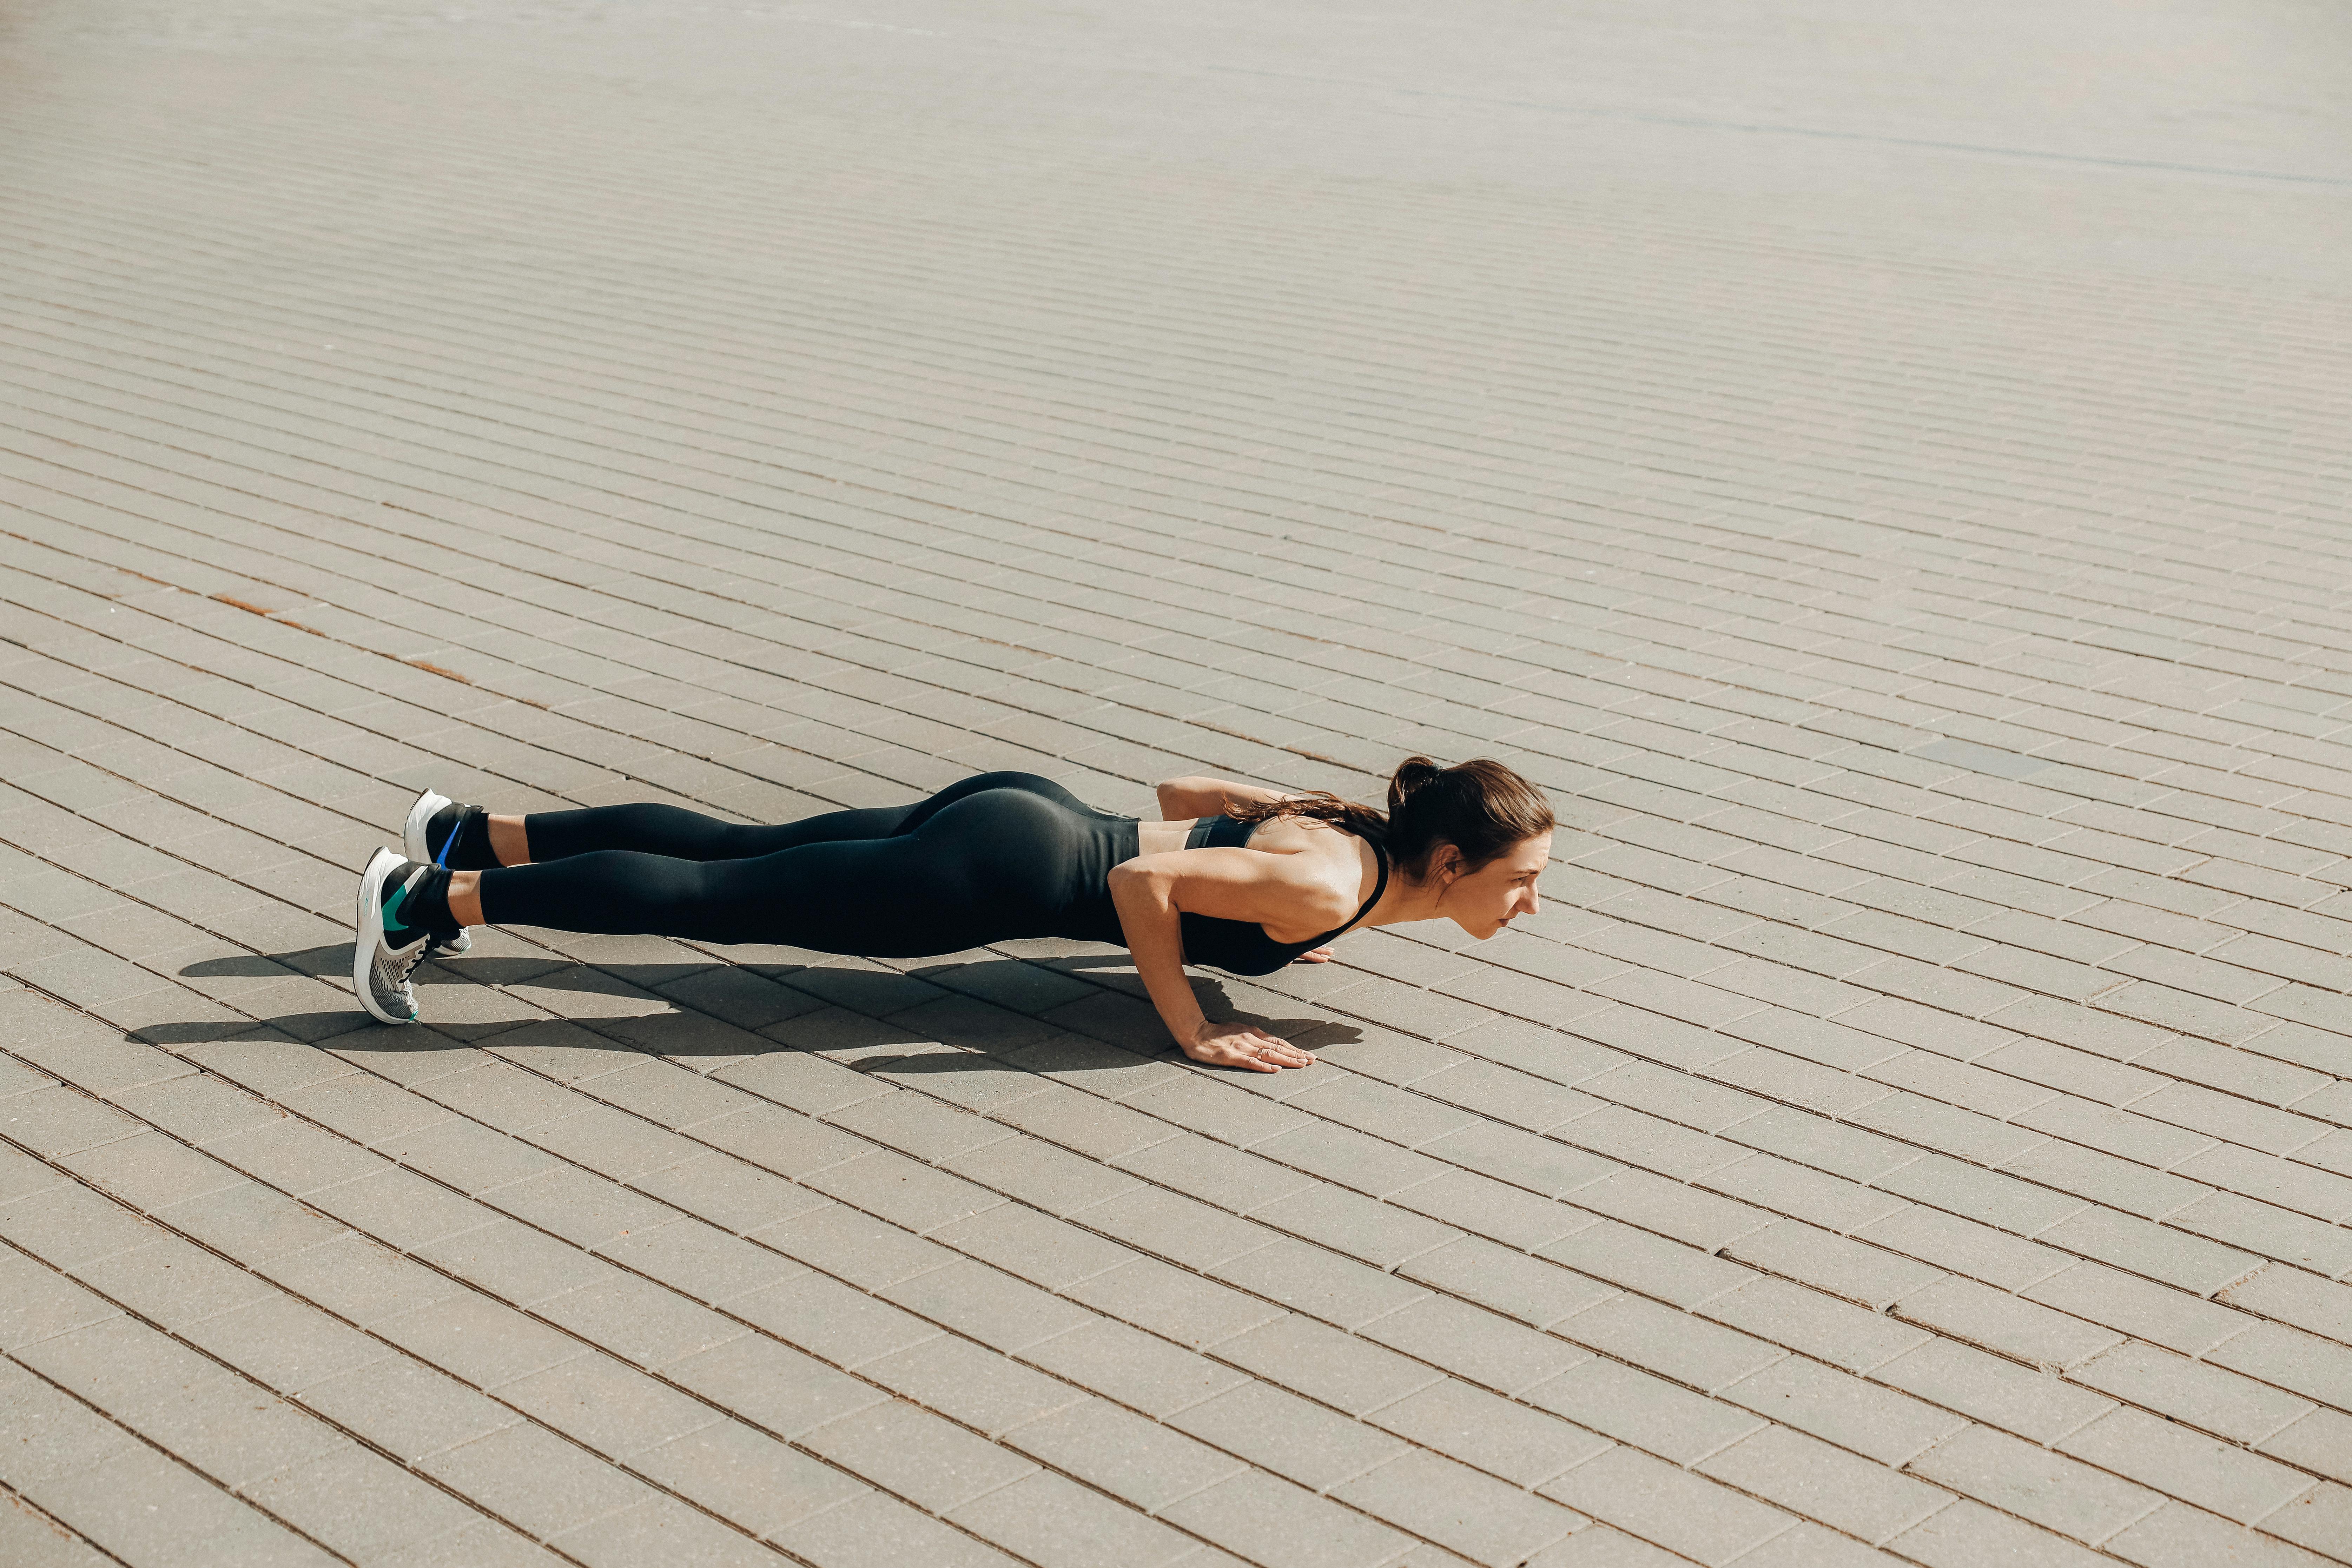 No Equipment, No Problem: Effective Bodyweight Exercises for Fitness